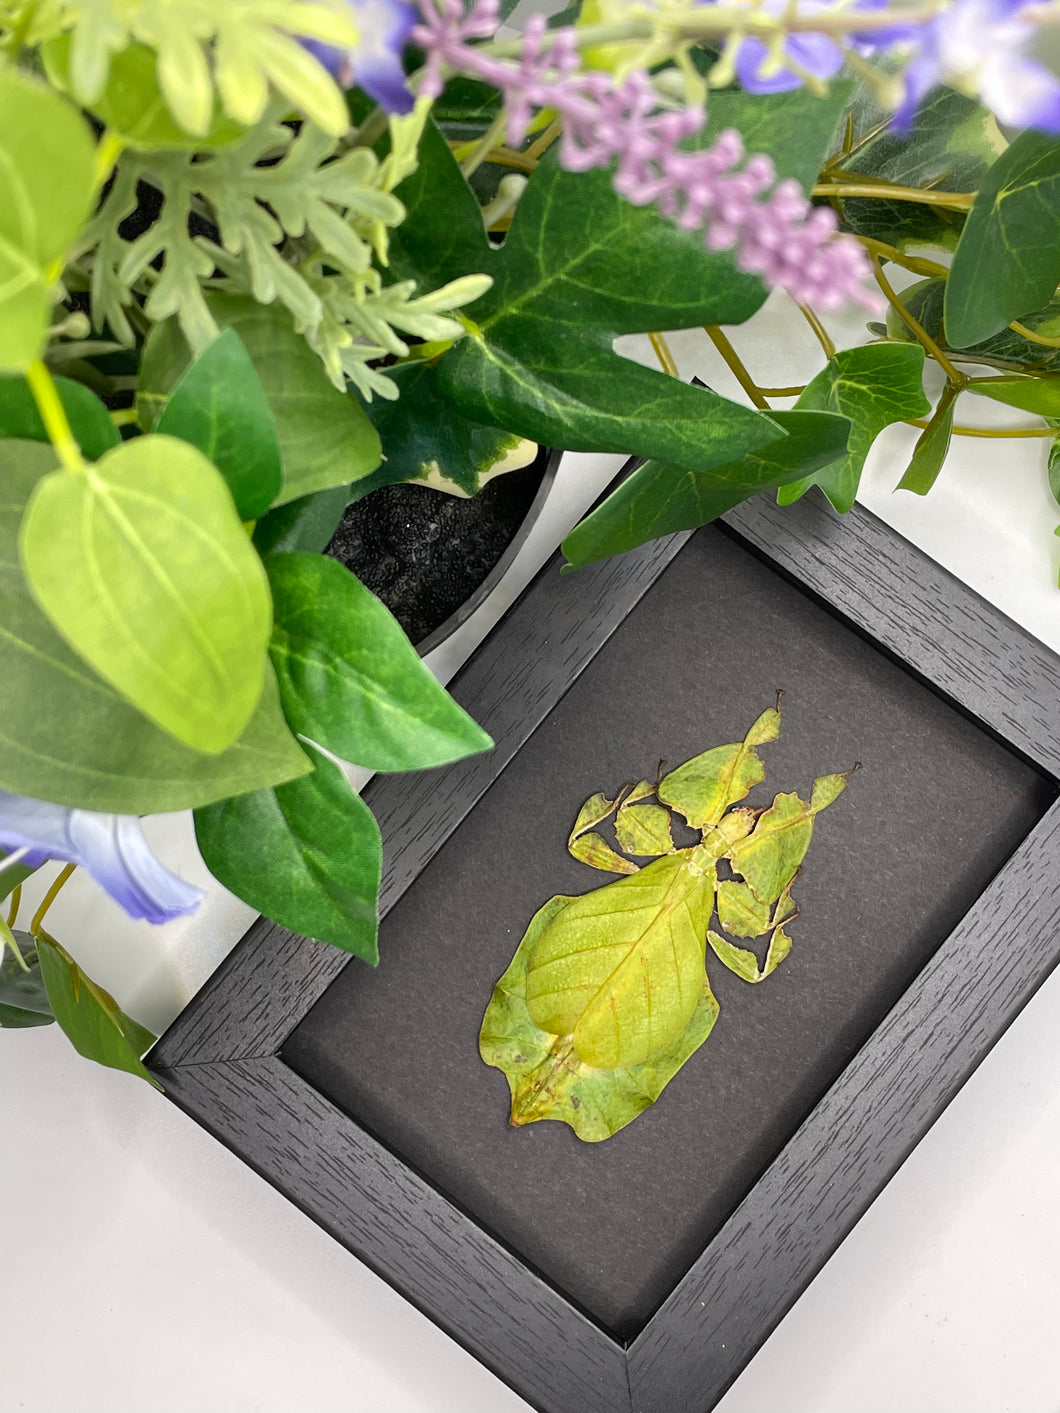 Phyllium Pulchrifolium / Leaf Insect in a frame - Black